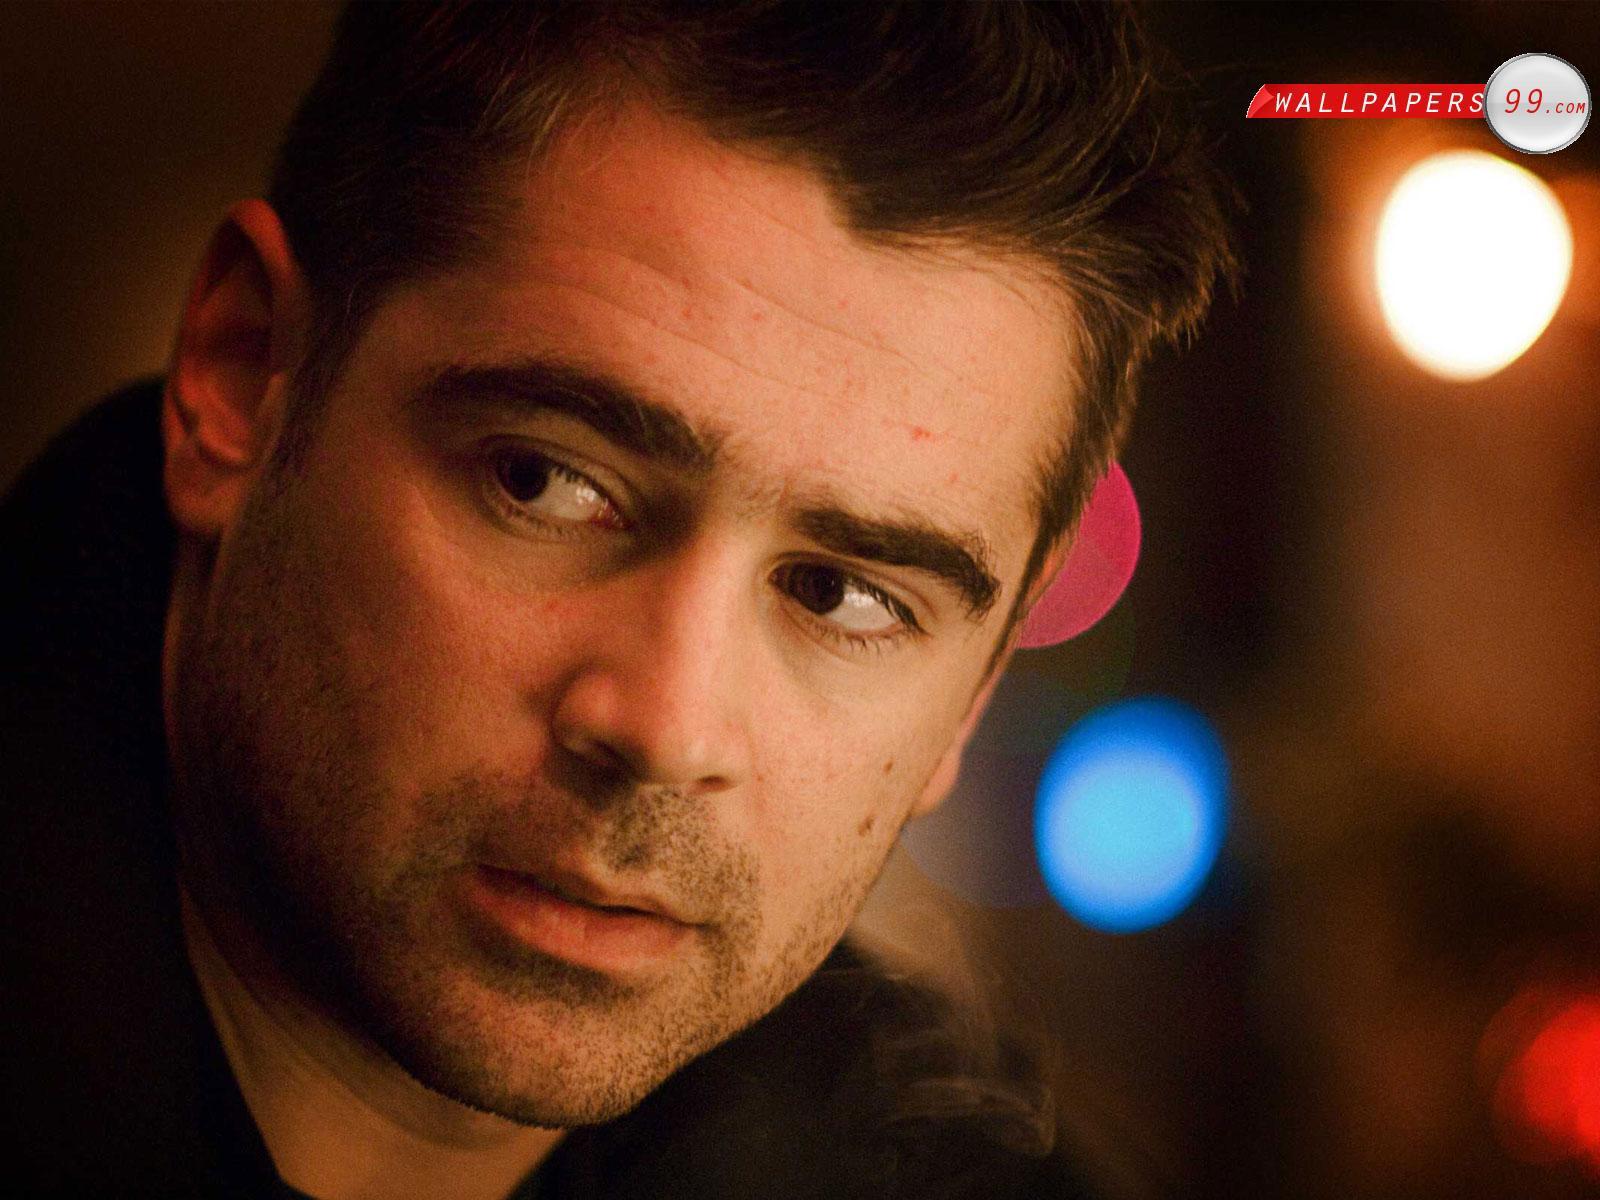 Famous Colin Farrell wallpaper and image, picture